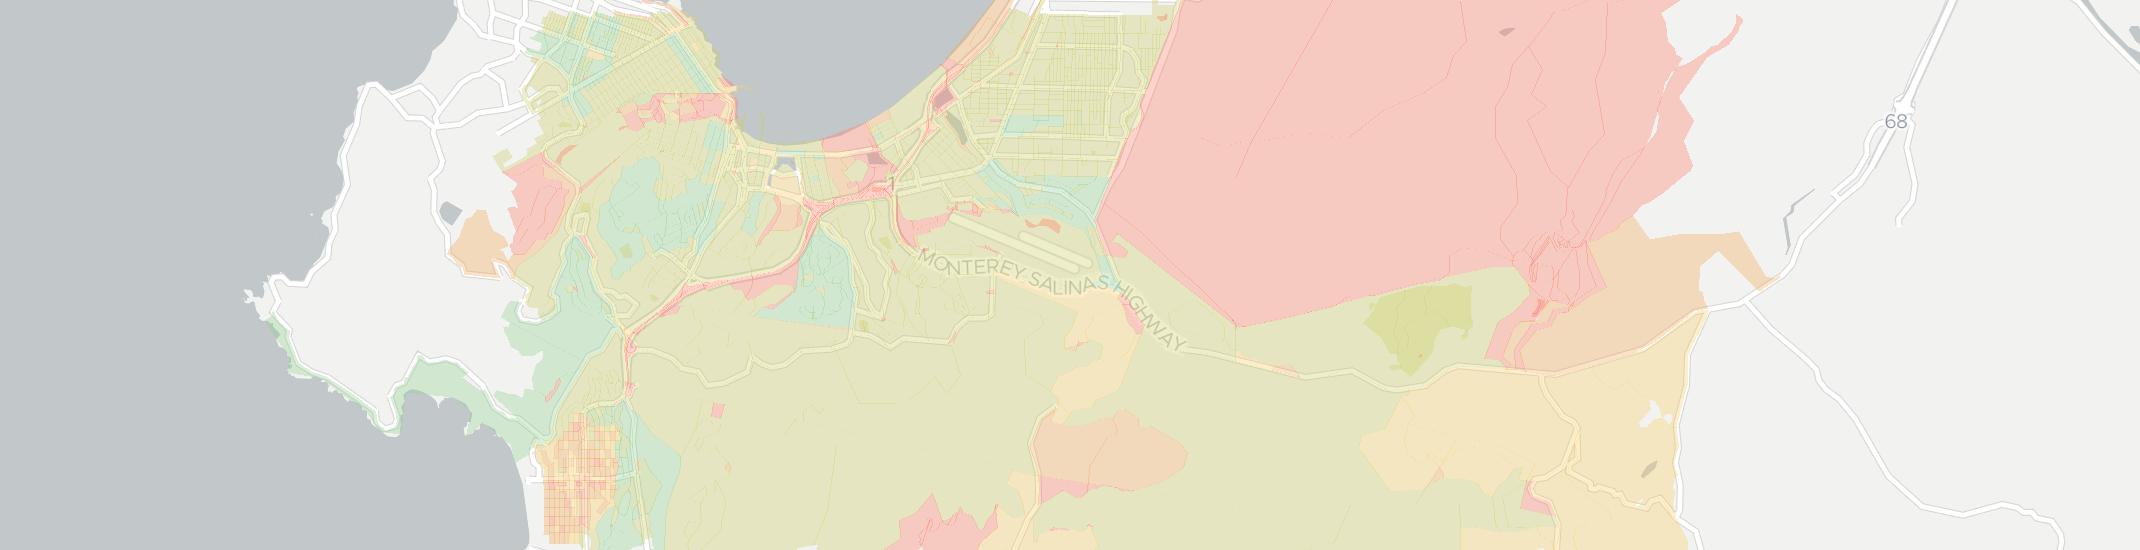 Monterey Internet Competition Map. Click for interactive map.